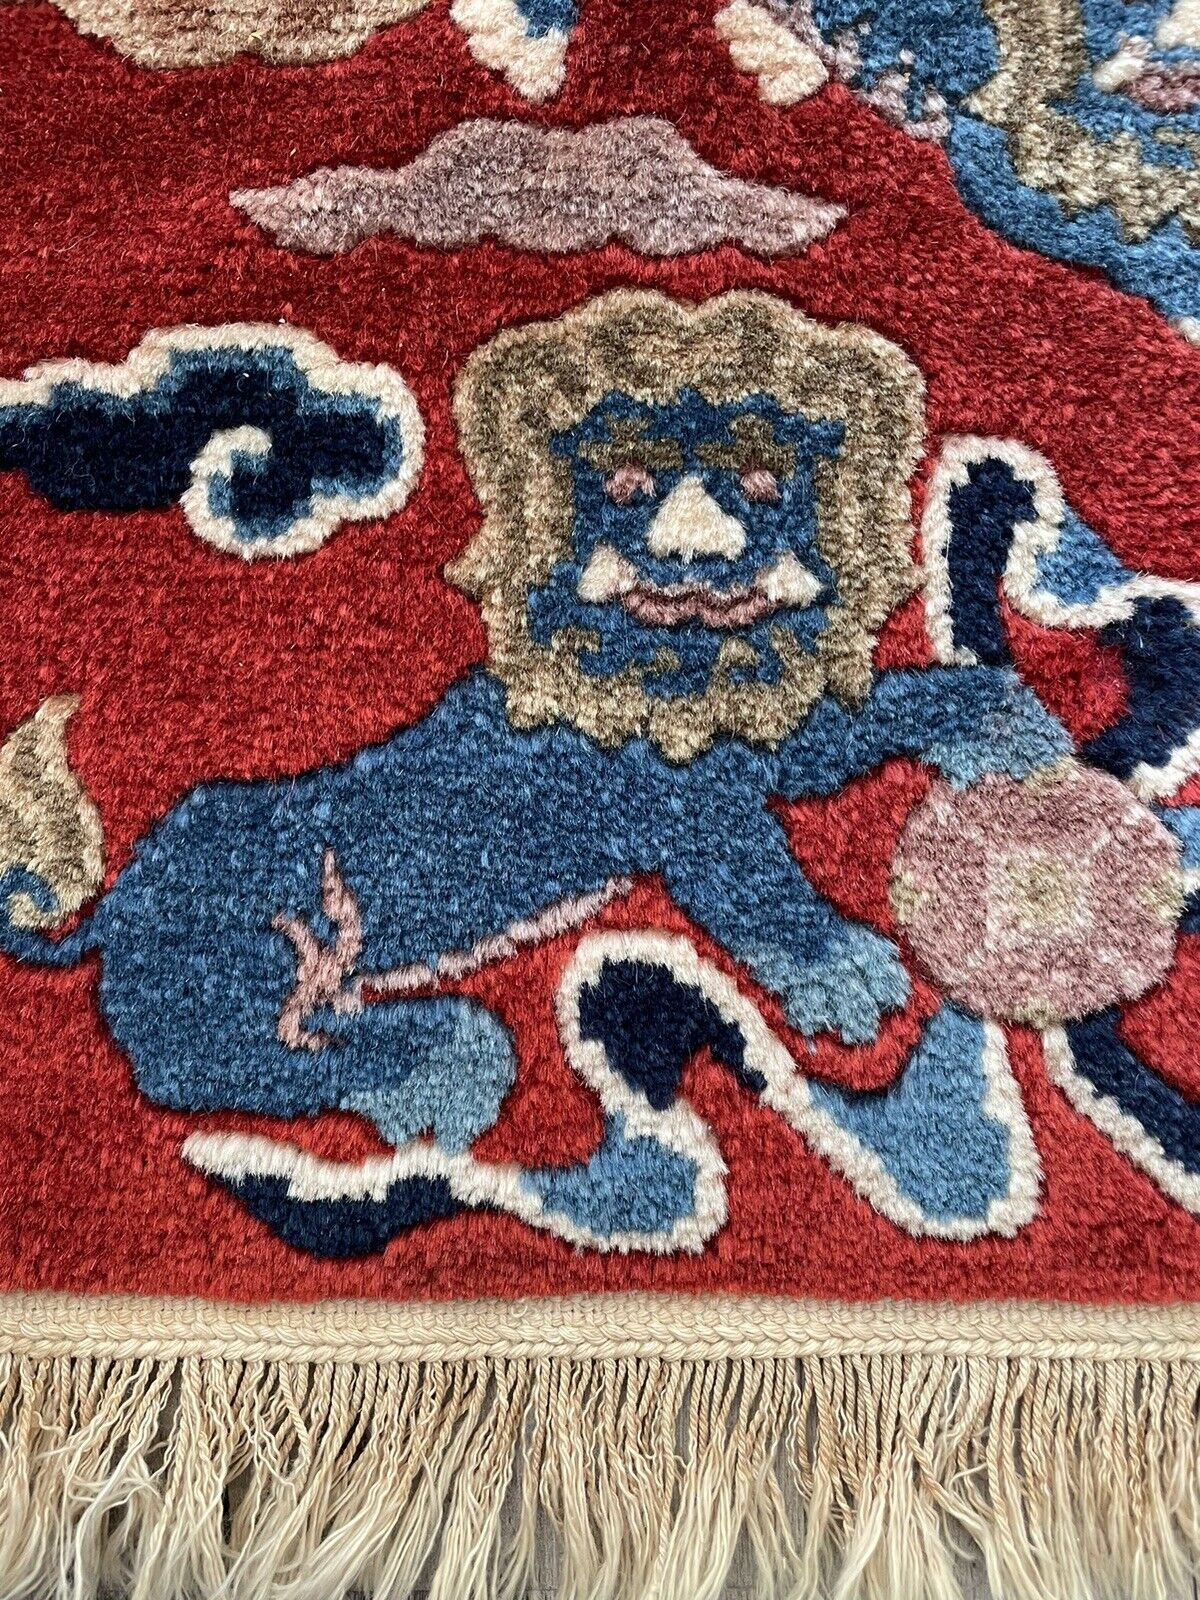 Close-up of durability on Handmade Antique Art Deco Chinese Mat - Detailed view emphasizing the durability of the mat despite its age, a testament to its quality craftsmanship.